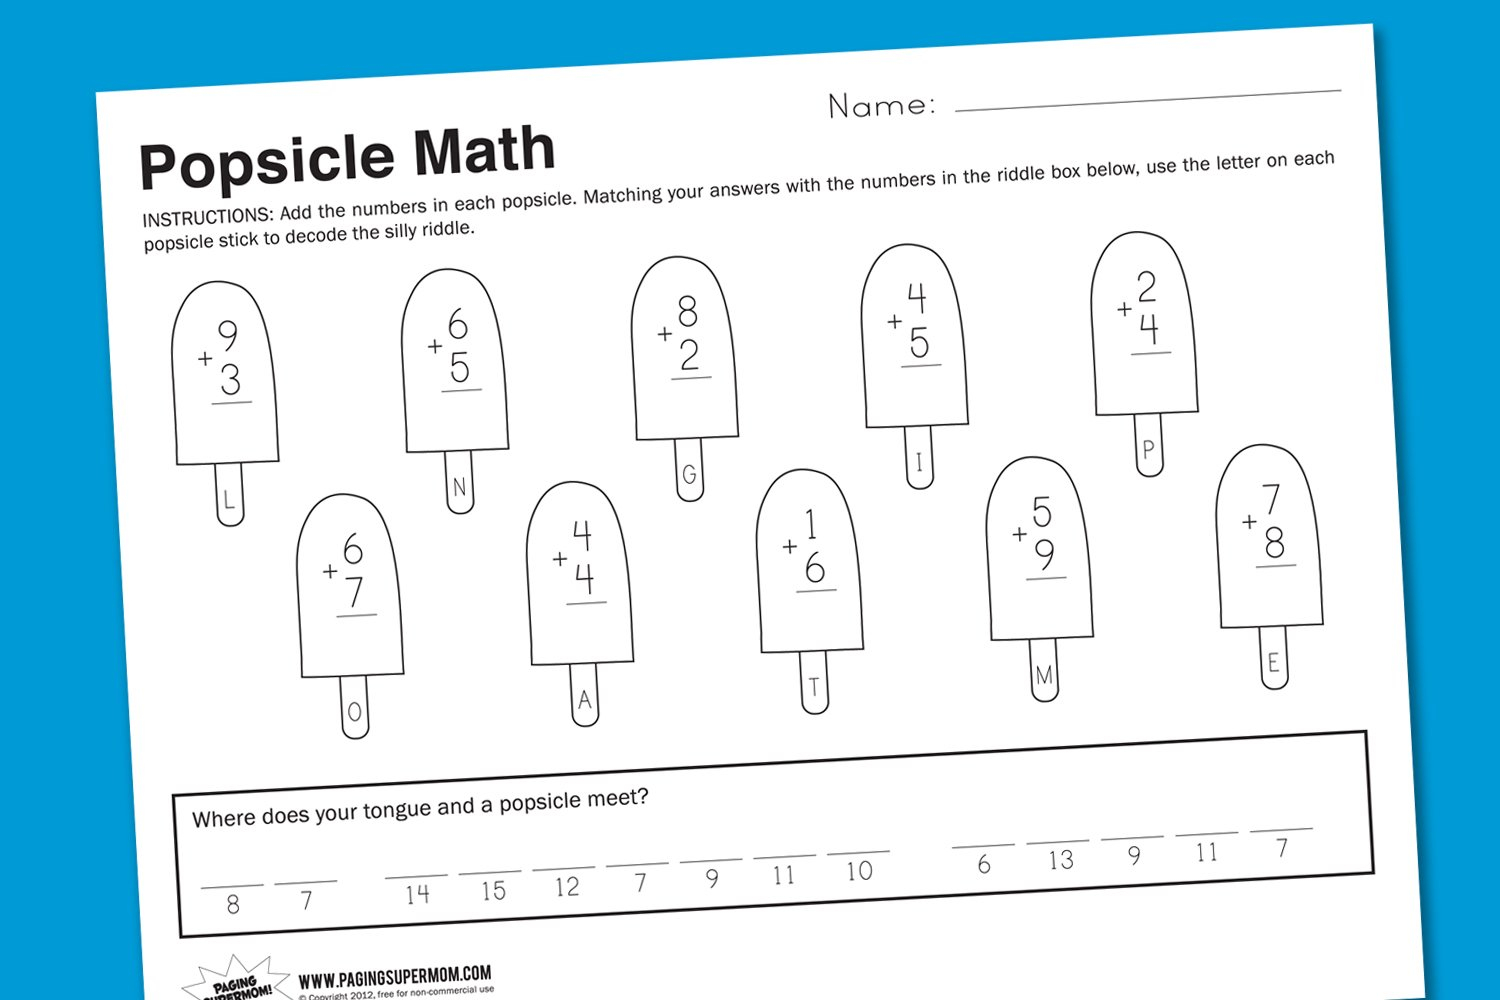 Worksheet Wednesday Popsicle Math  Paging Supermom For Fun Summer Worksheets For 4Th Grade